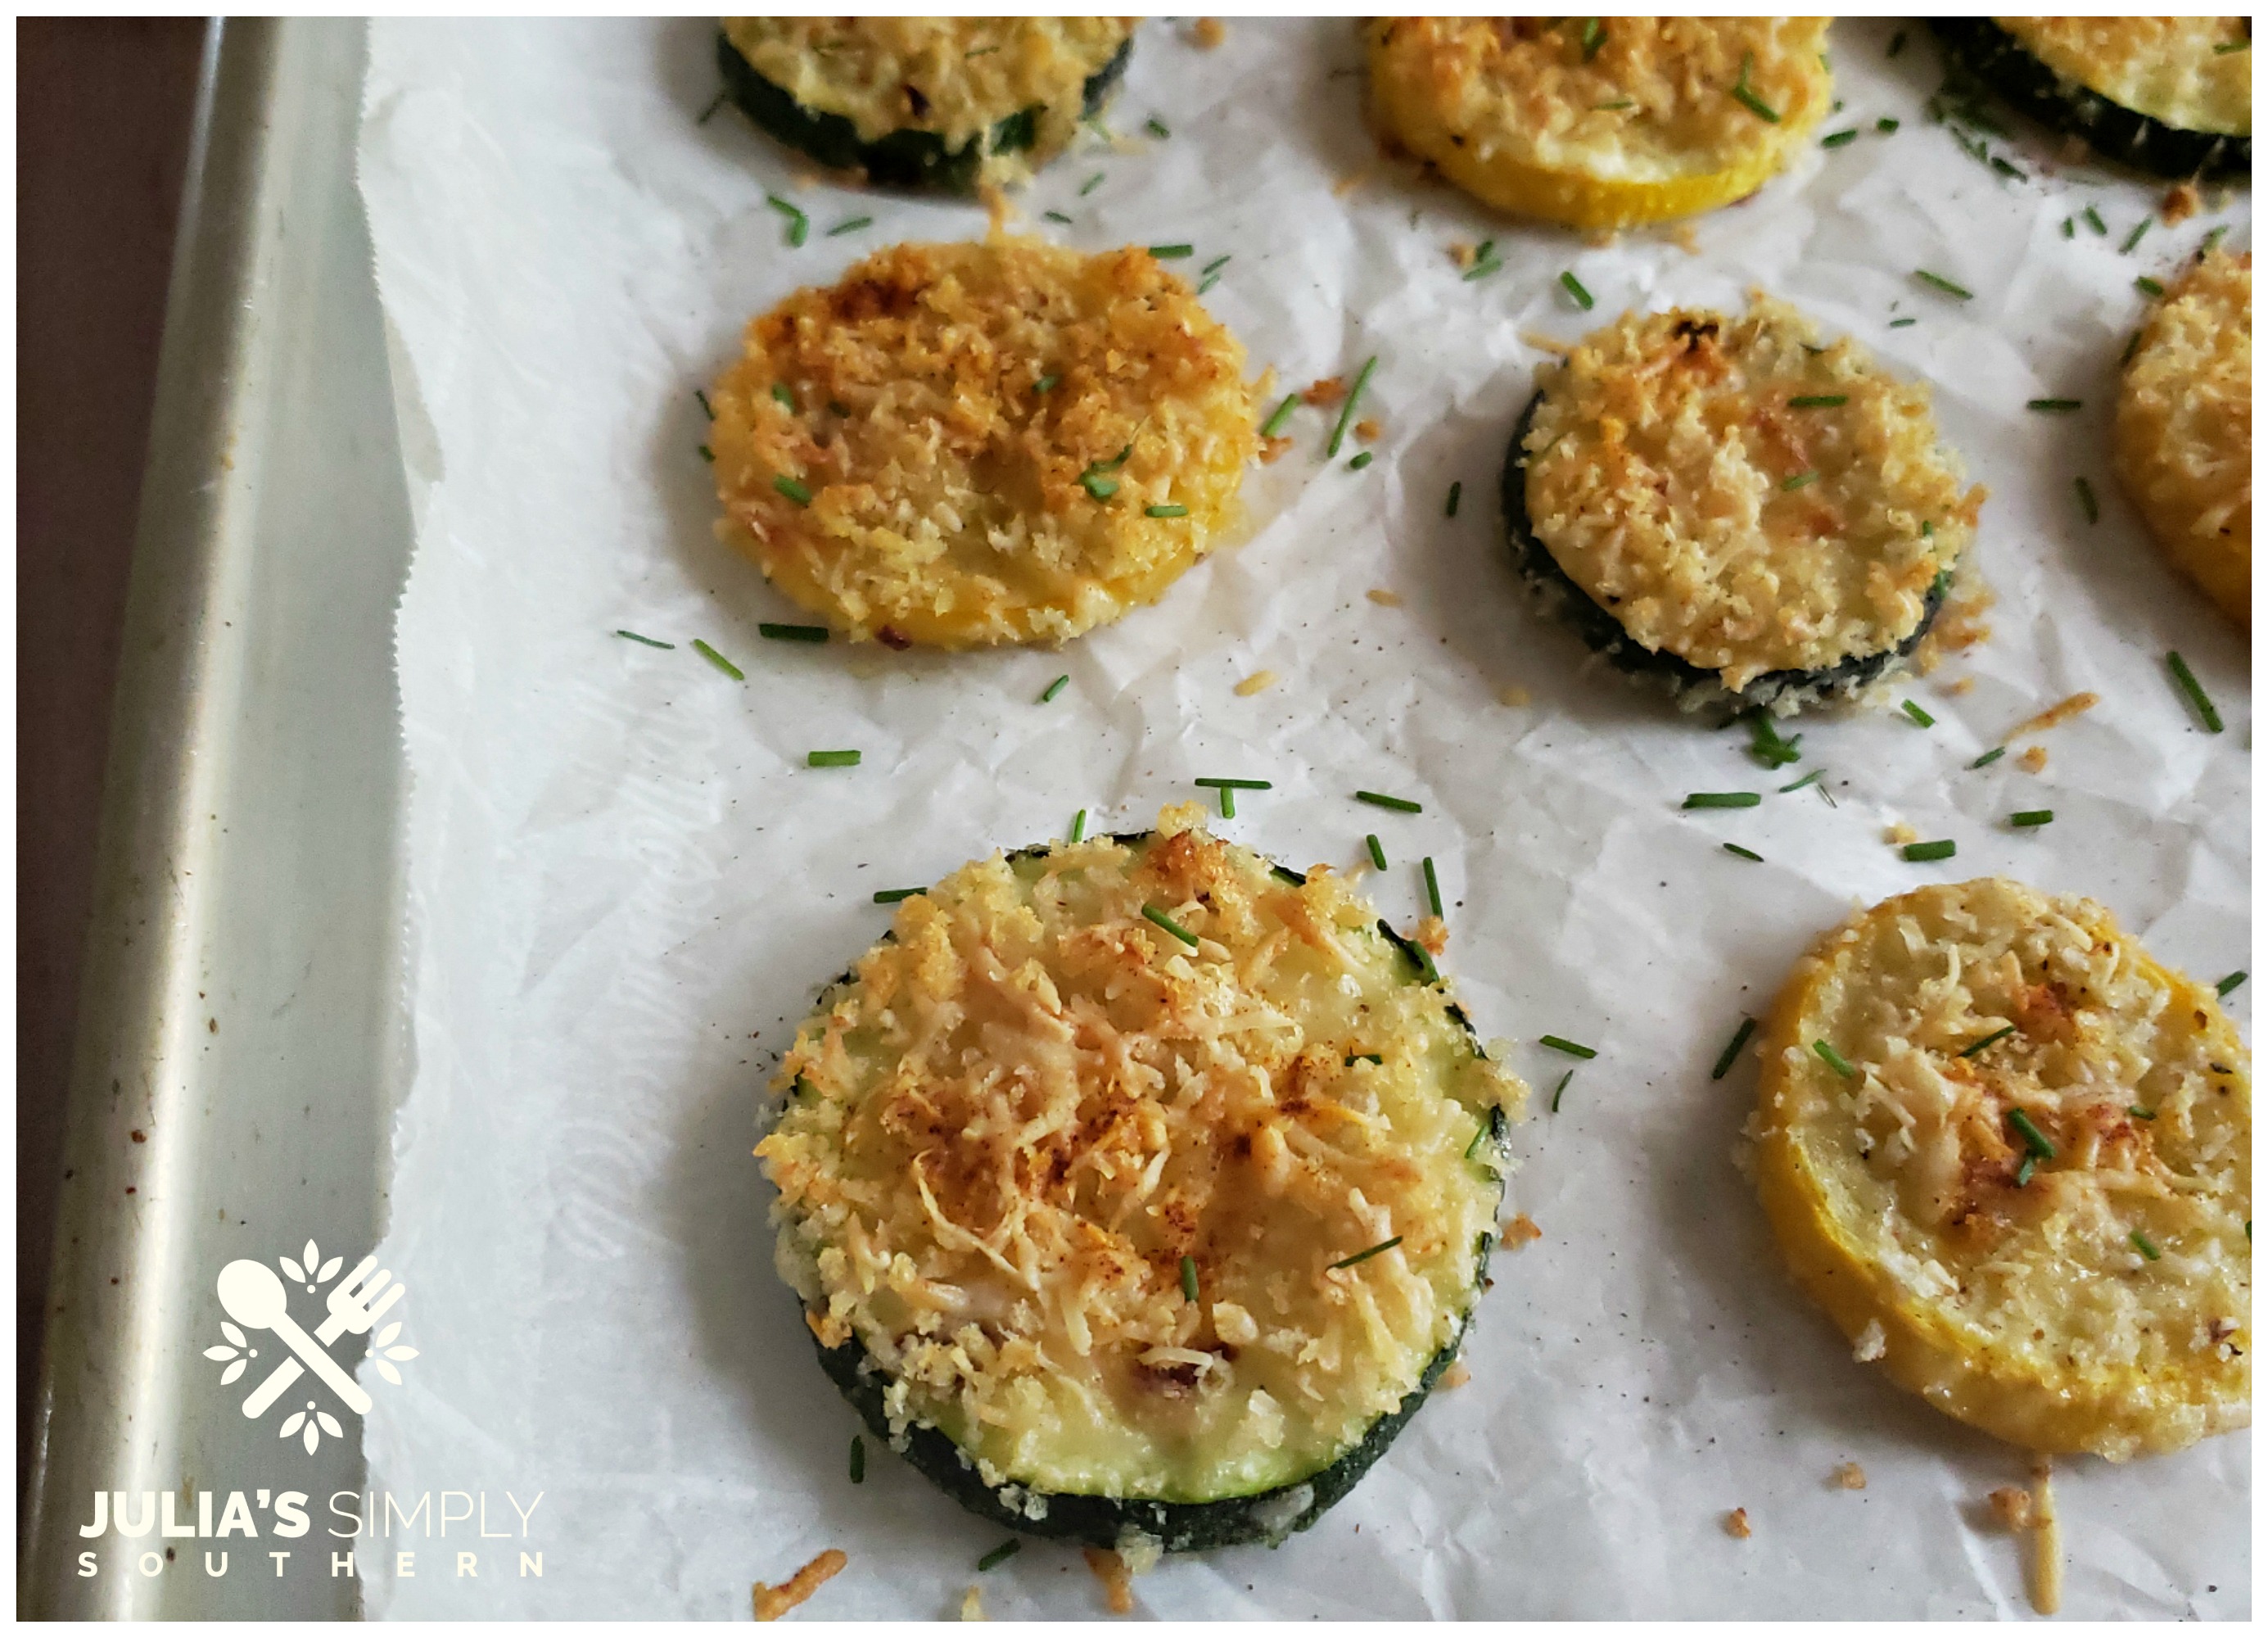 Sheet pan with baked yellow squash and zucchini rounds with Parmesan cheese that is an awesome side dish recipe